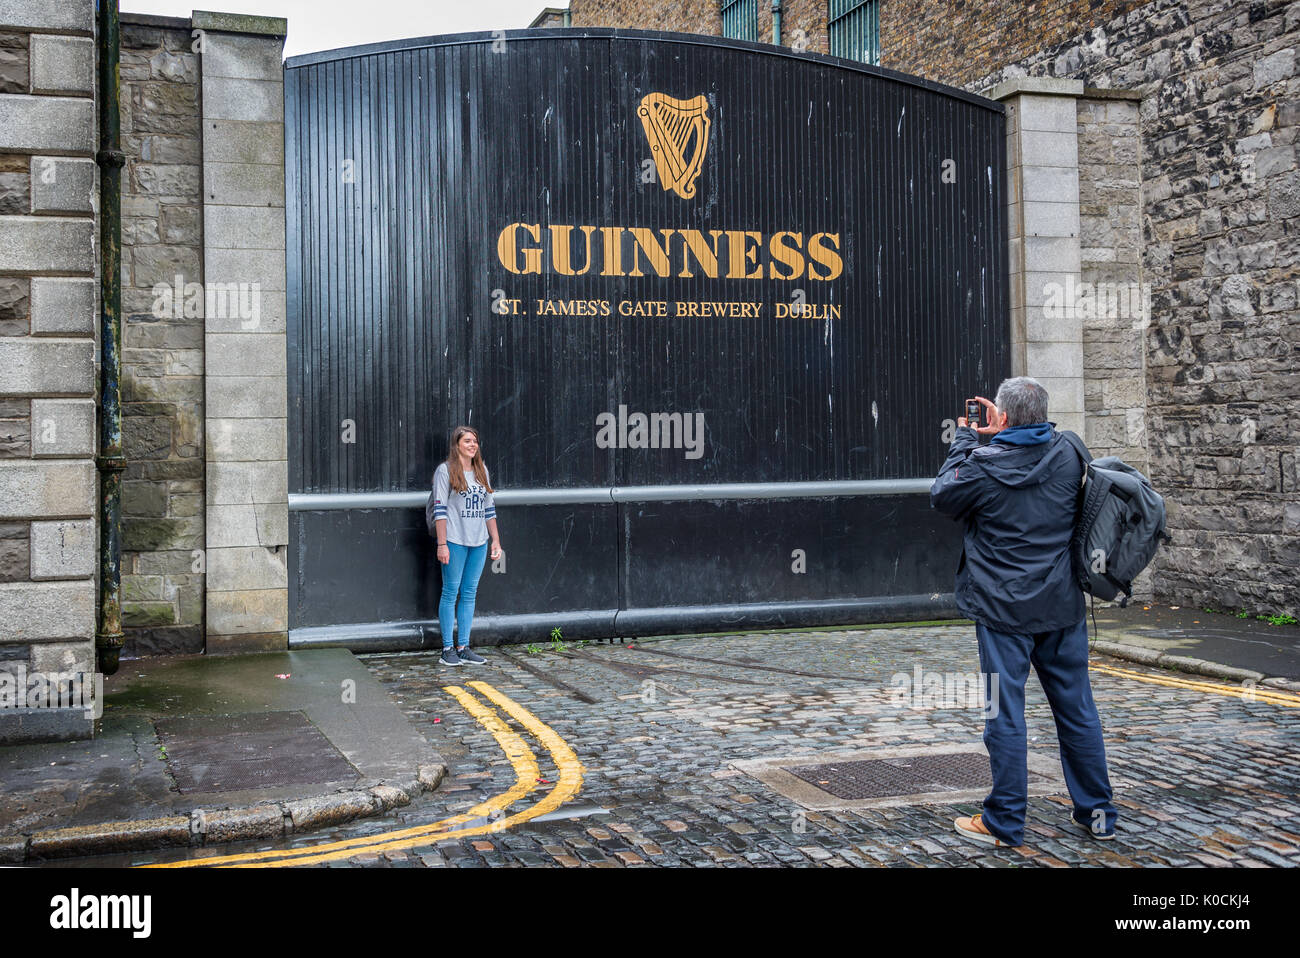 DUBLIN, IRELAND - AUGUST 14: Tourists taking photo  at the St James Gate of the Guinness storehouse brewery. The Guinness Storehouse is a popular tour Stock Photo